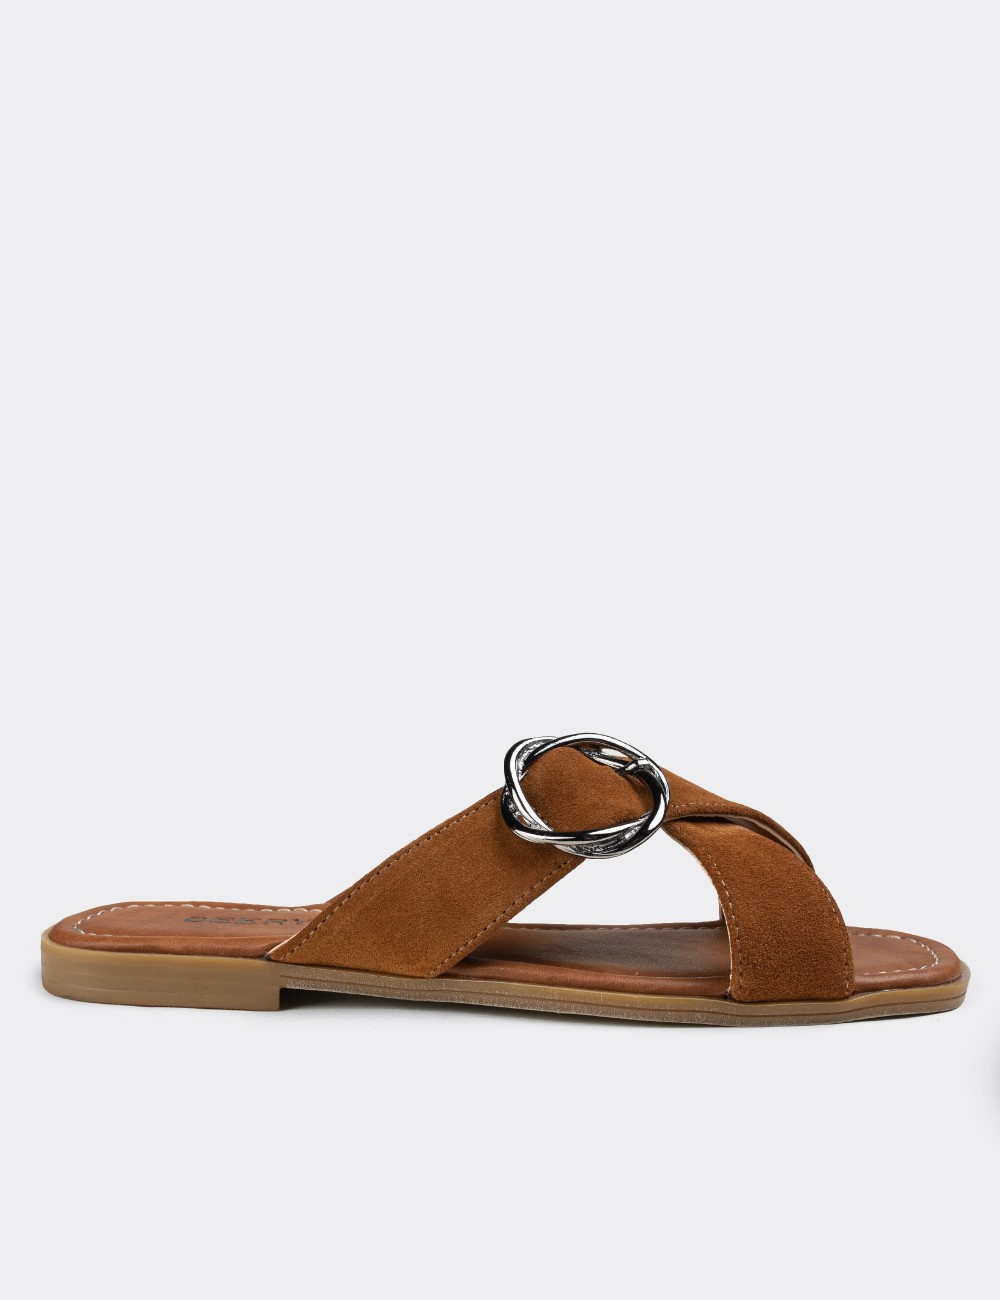 Tan Suede Leather Sandals - E2136ZTBAC01